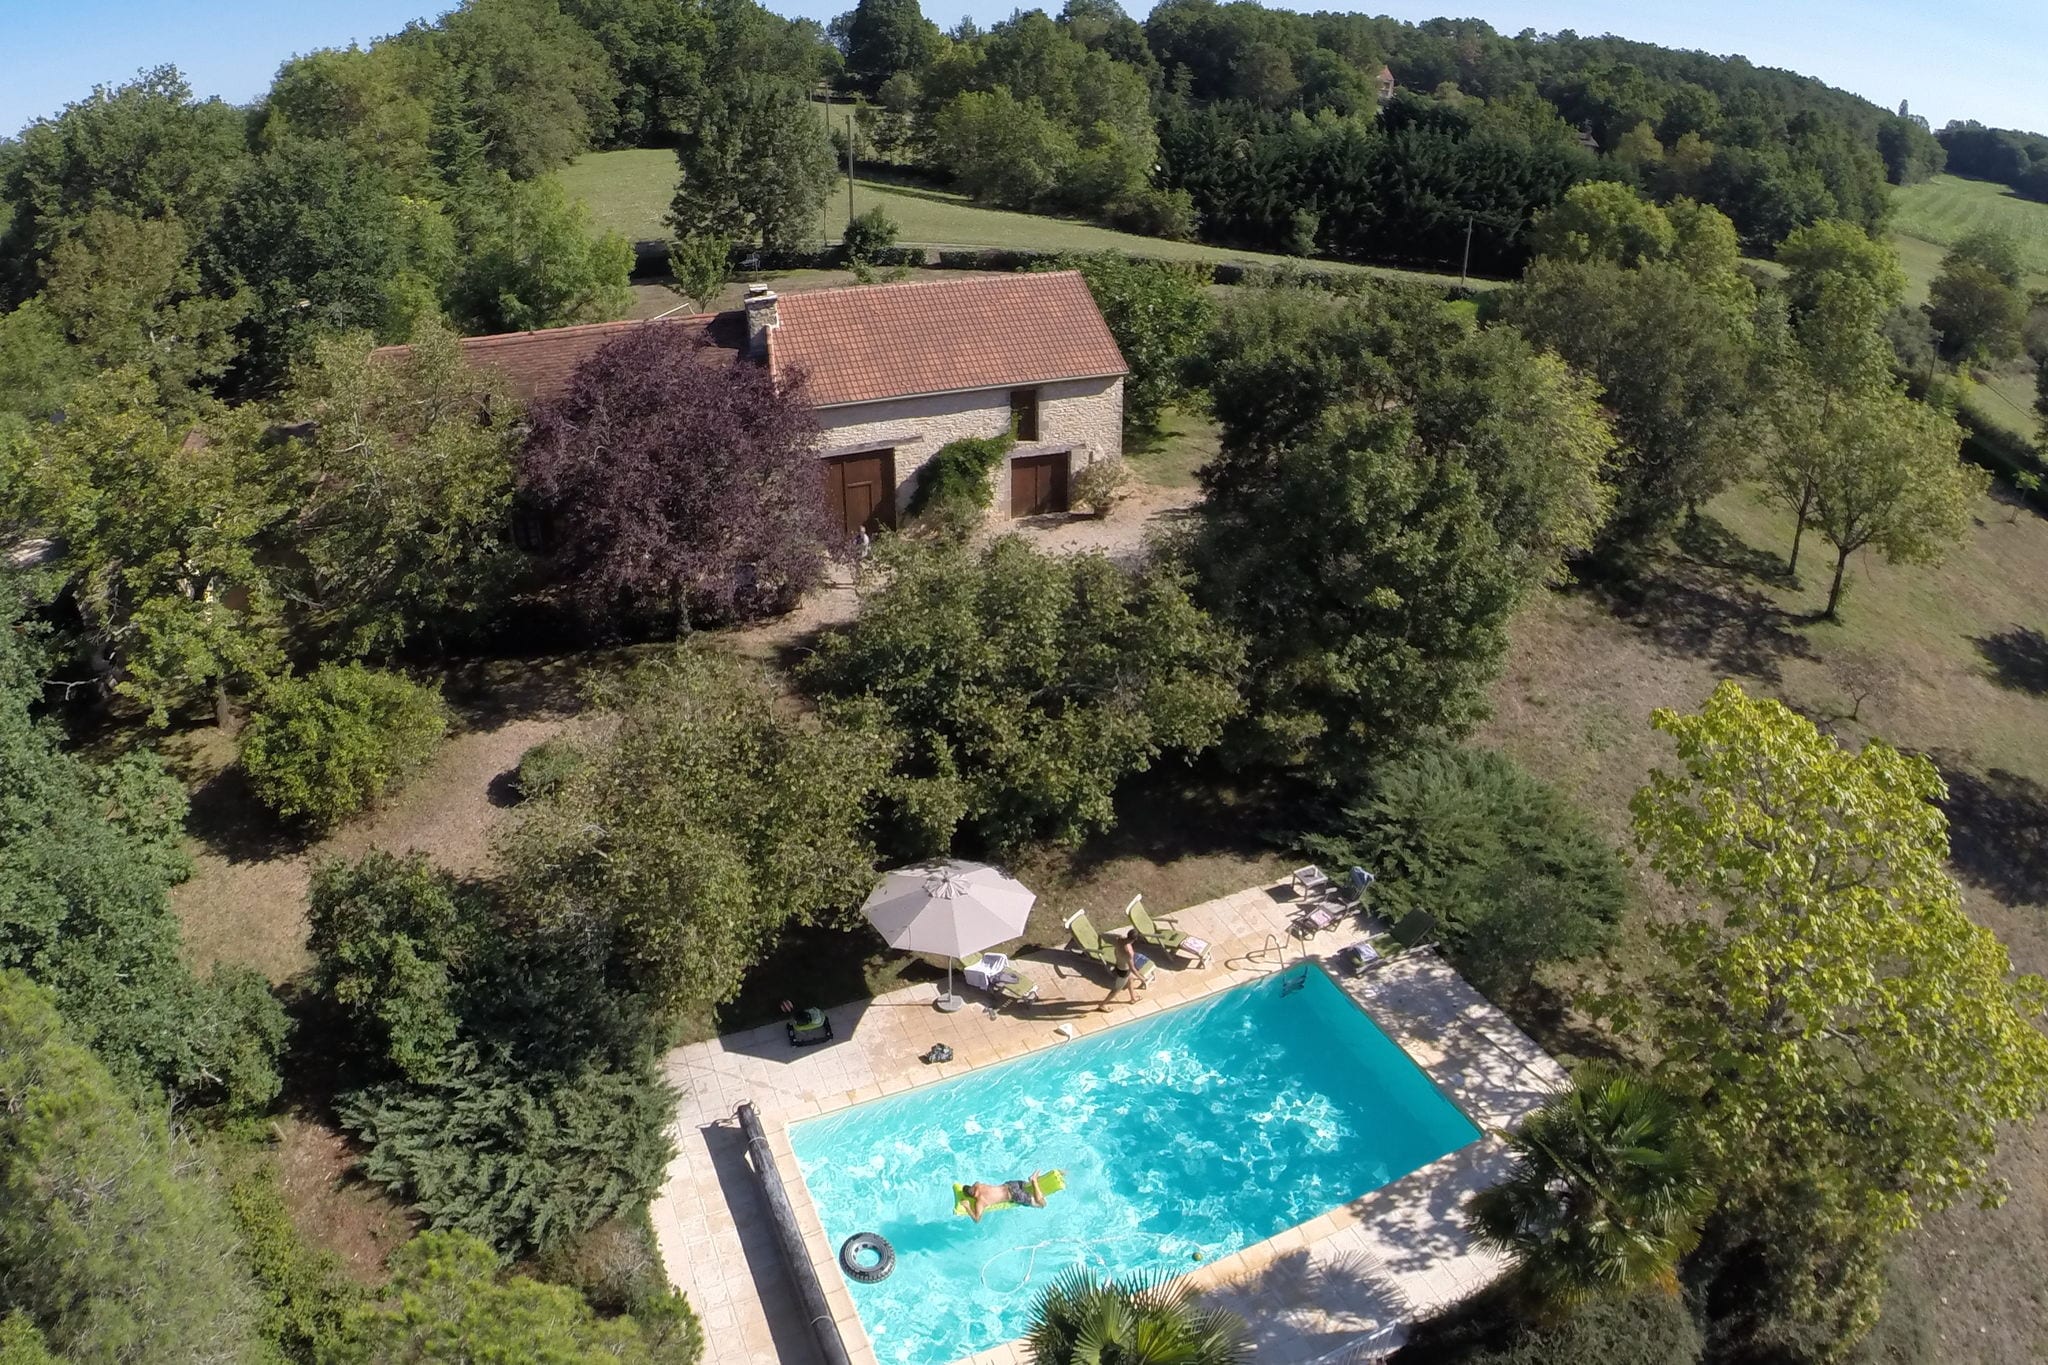 Holiday home with AC and private pool in forested surroundings.